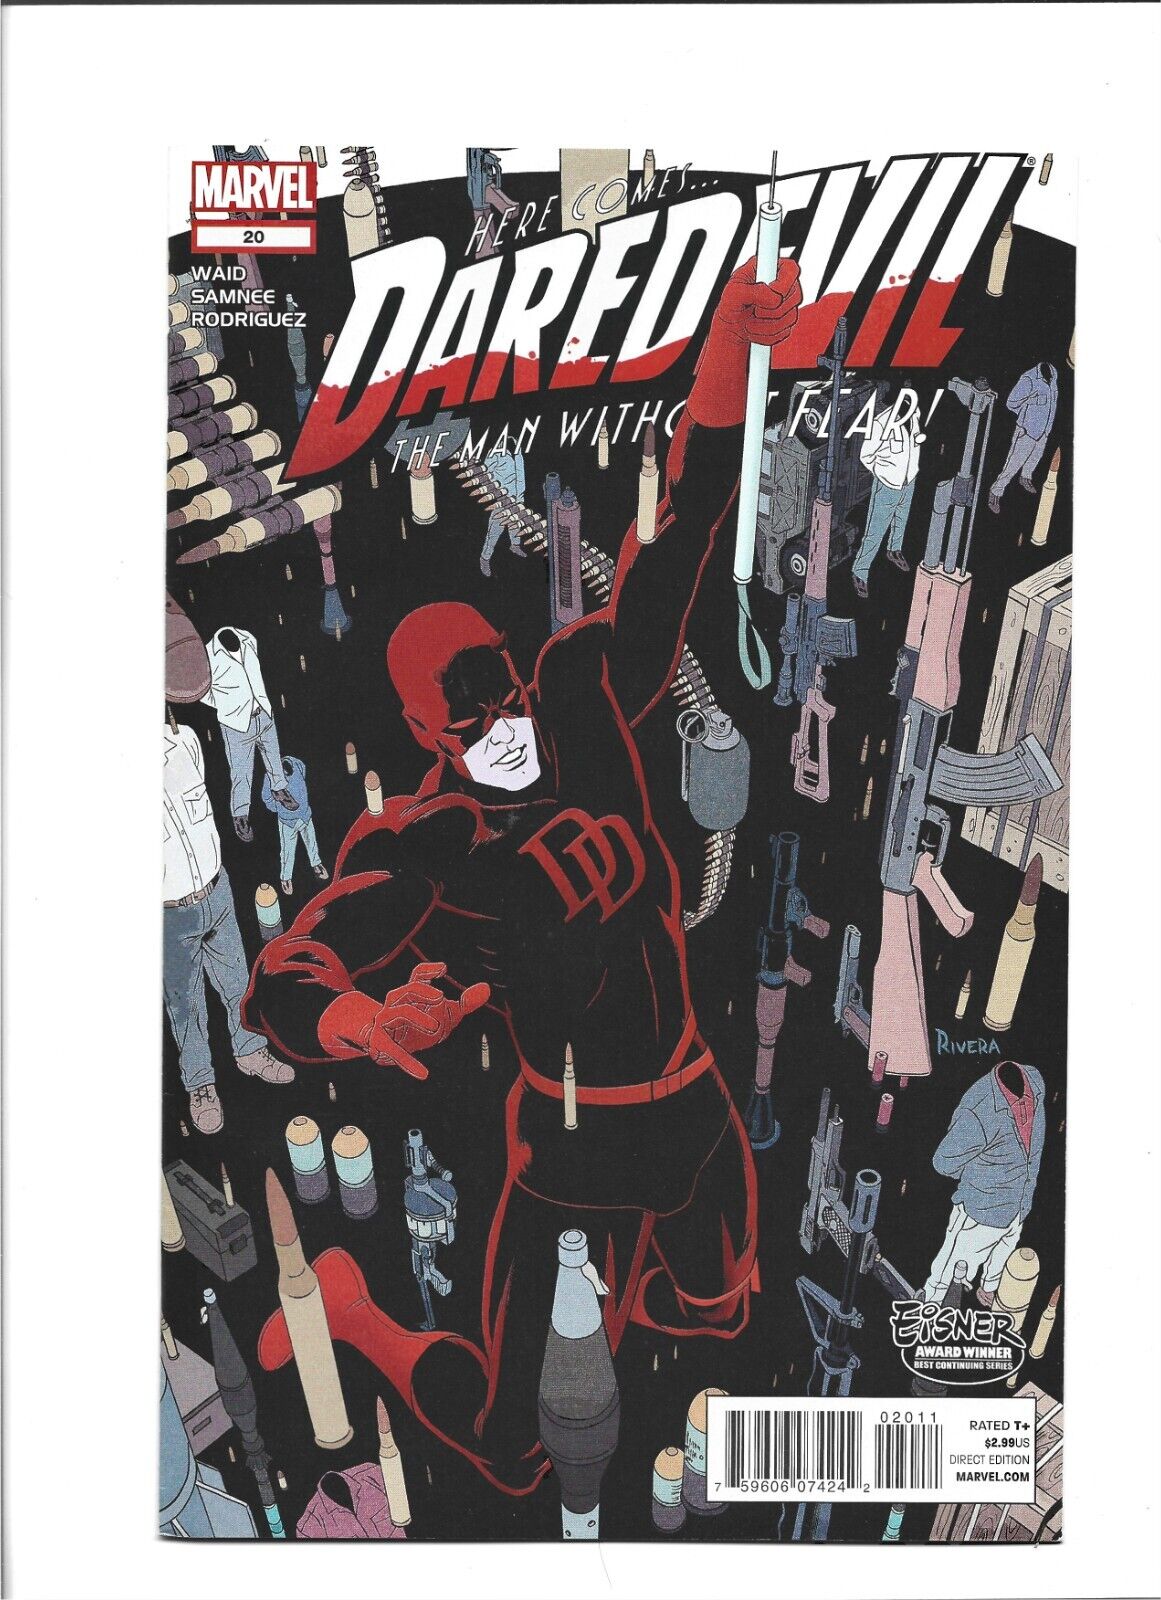 HERECOMES...DAREDEVIL THE MAN WITHOUT FEAR #20 MARVEL 2013 VF+ COMBINE SHIP